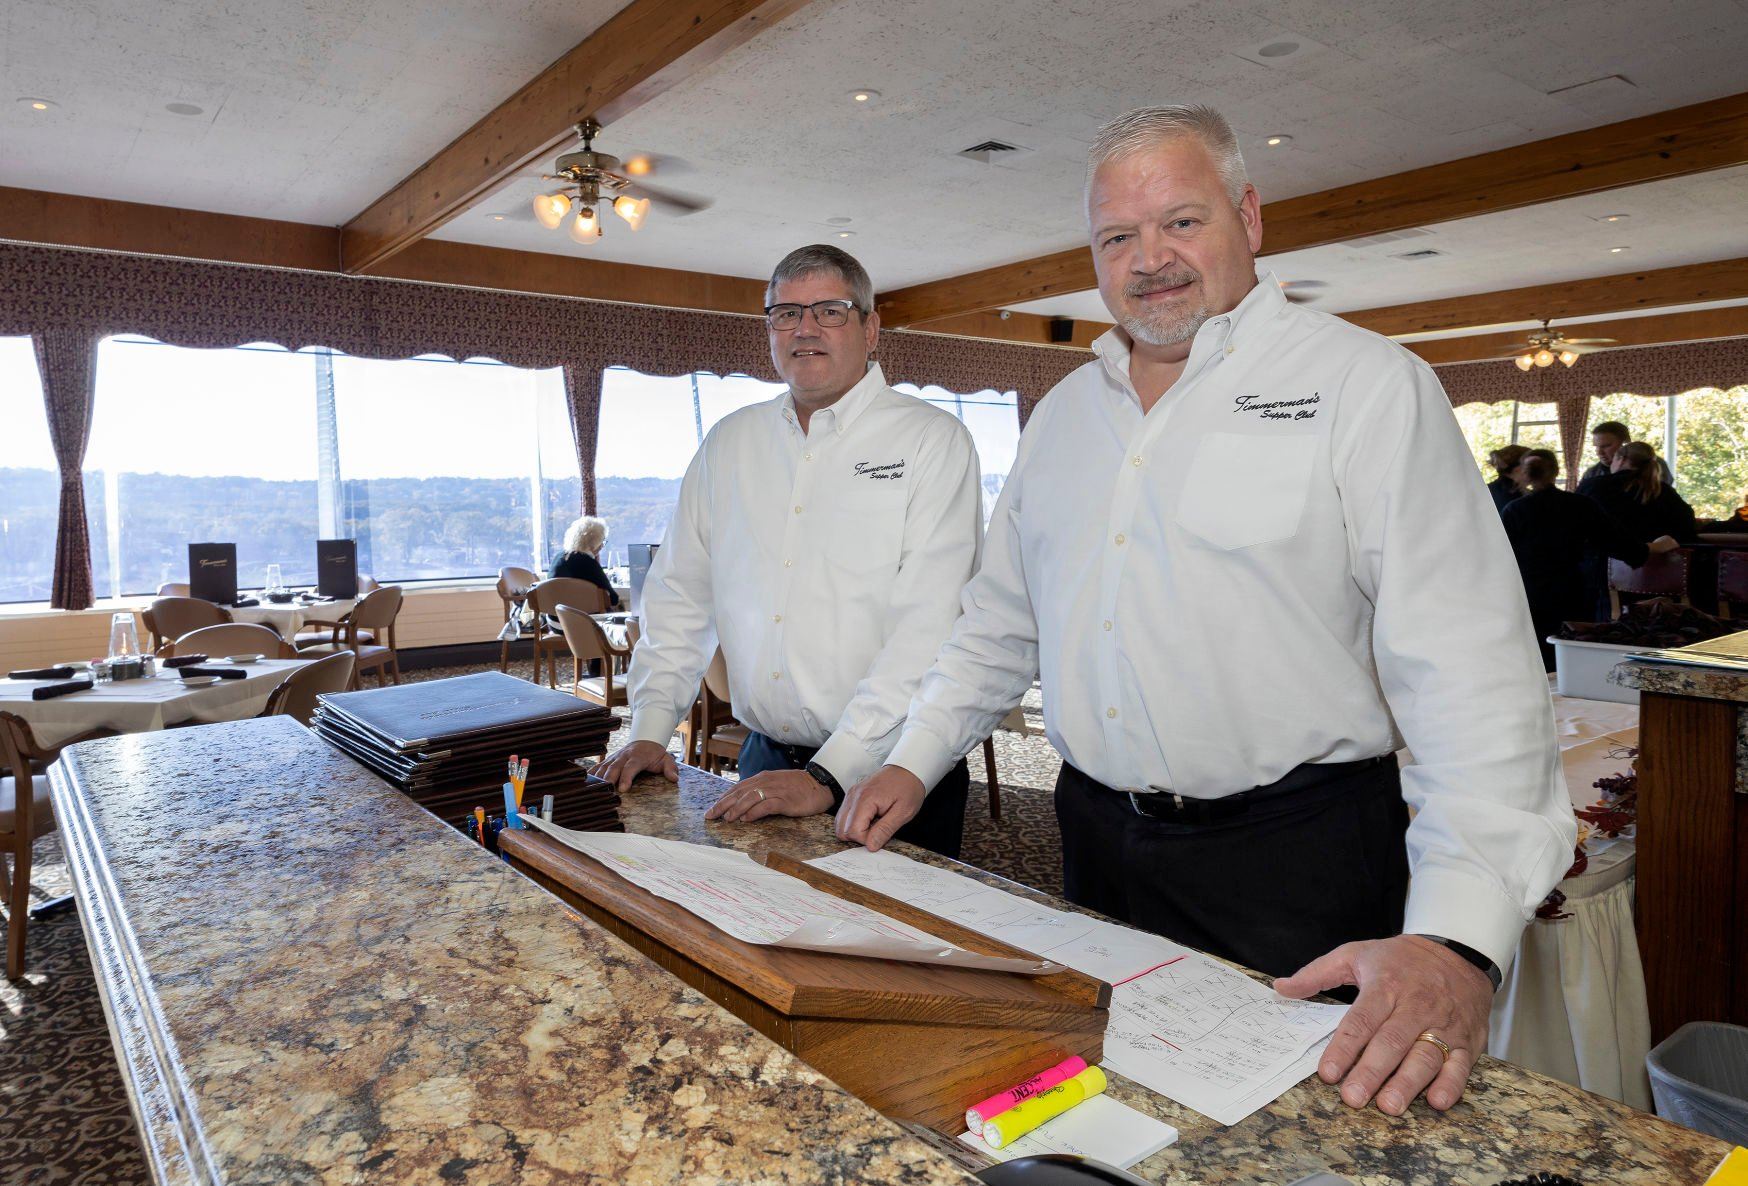 Timmerman’s Supper Club owners Gary Neuses (left) and Mark Hayes took over the East Dubuque, Ill., restaurant in 2003. Helen and Bob Timmerman opened the self-named establishment in 1961 on a bluff east of the town.    PHOTO CREDIT: Stephen Gassman